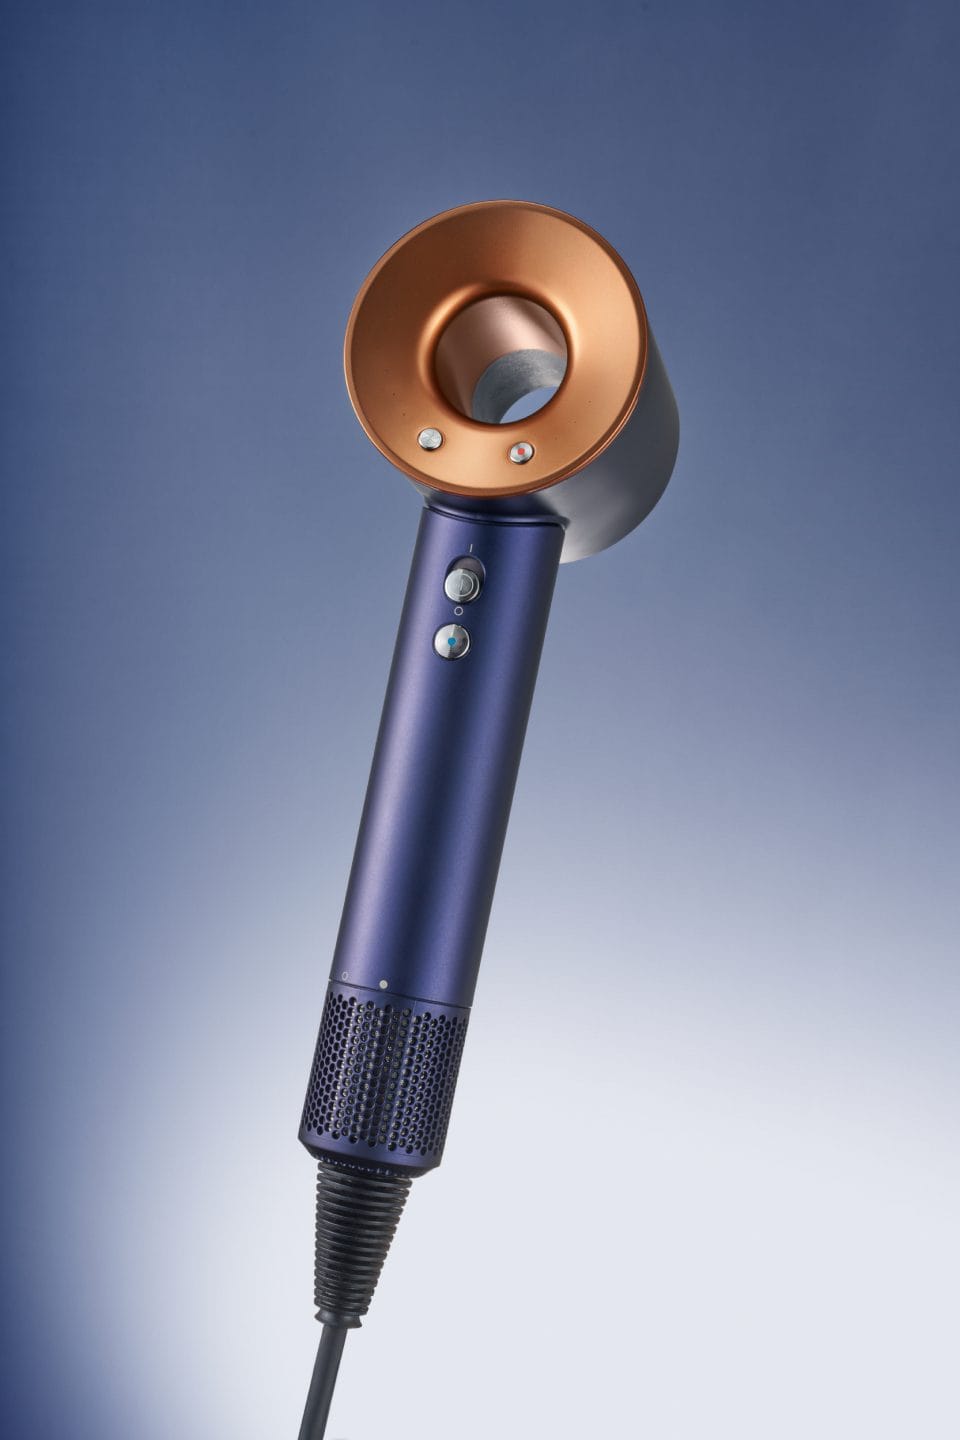 The Mane Appeal Of the Dyson SupersonicTM hair dryer